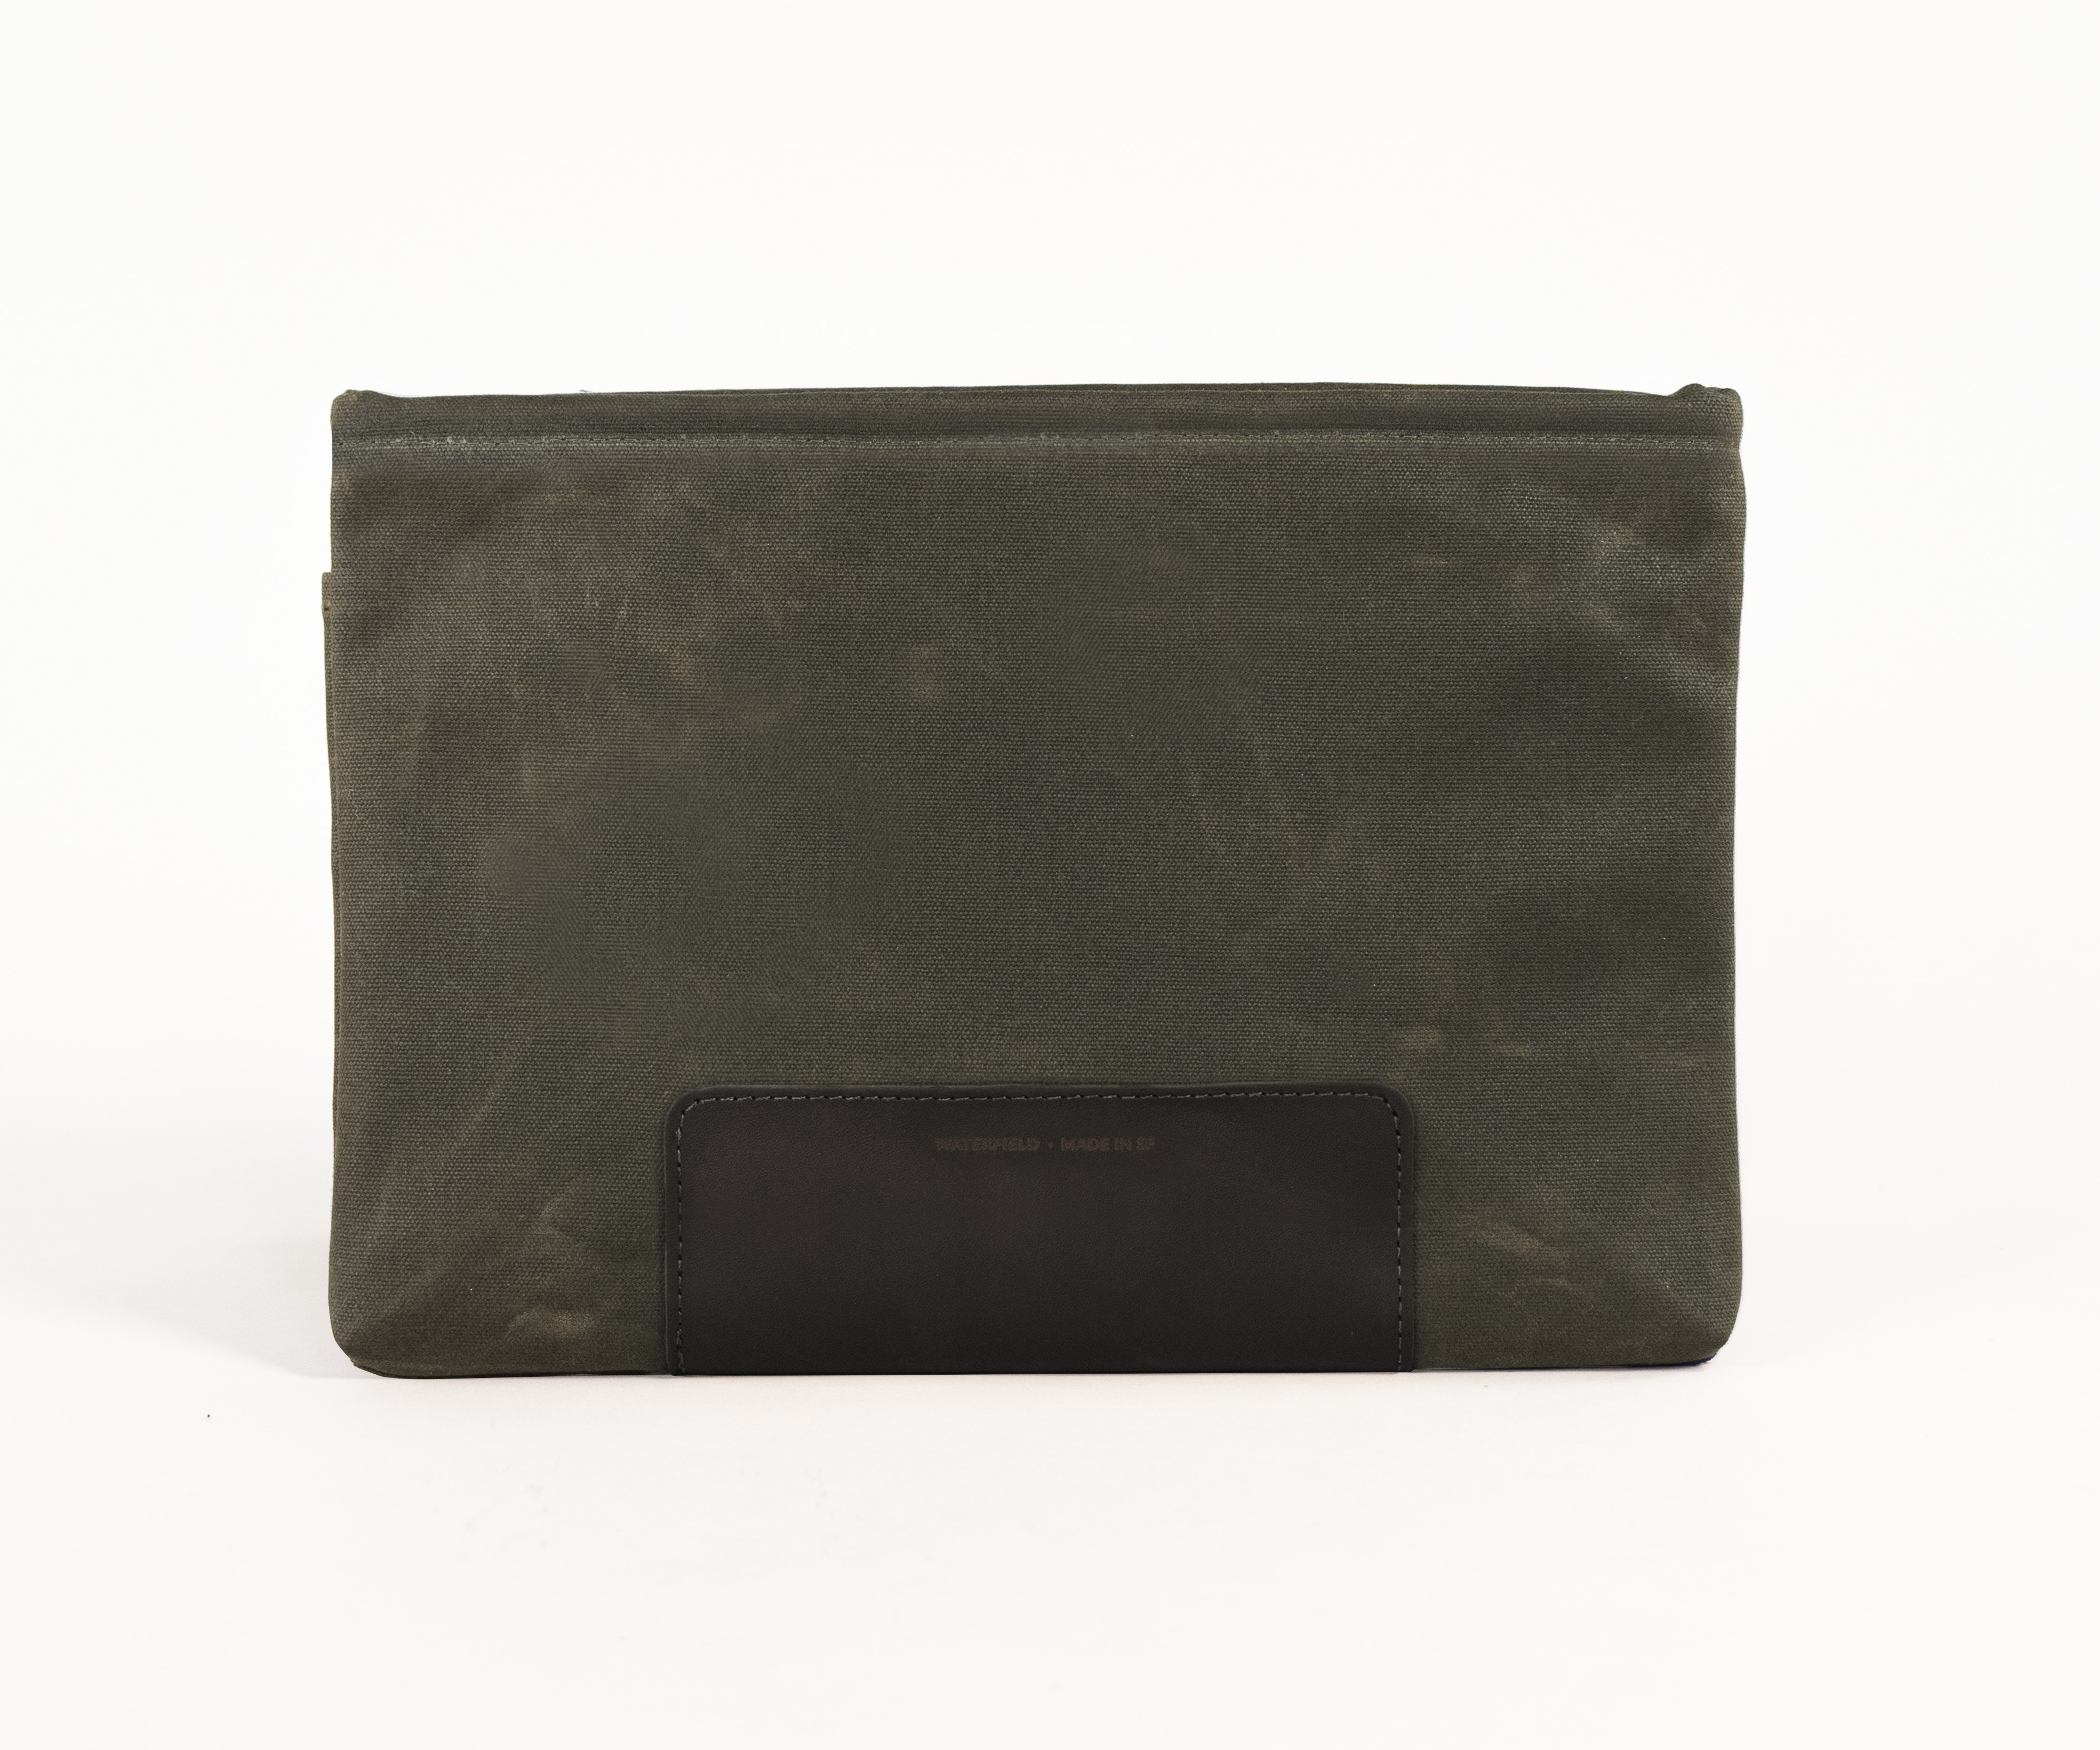 Magnetic Laptop Sleeve in green waxed canvas